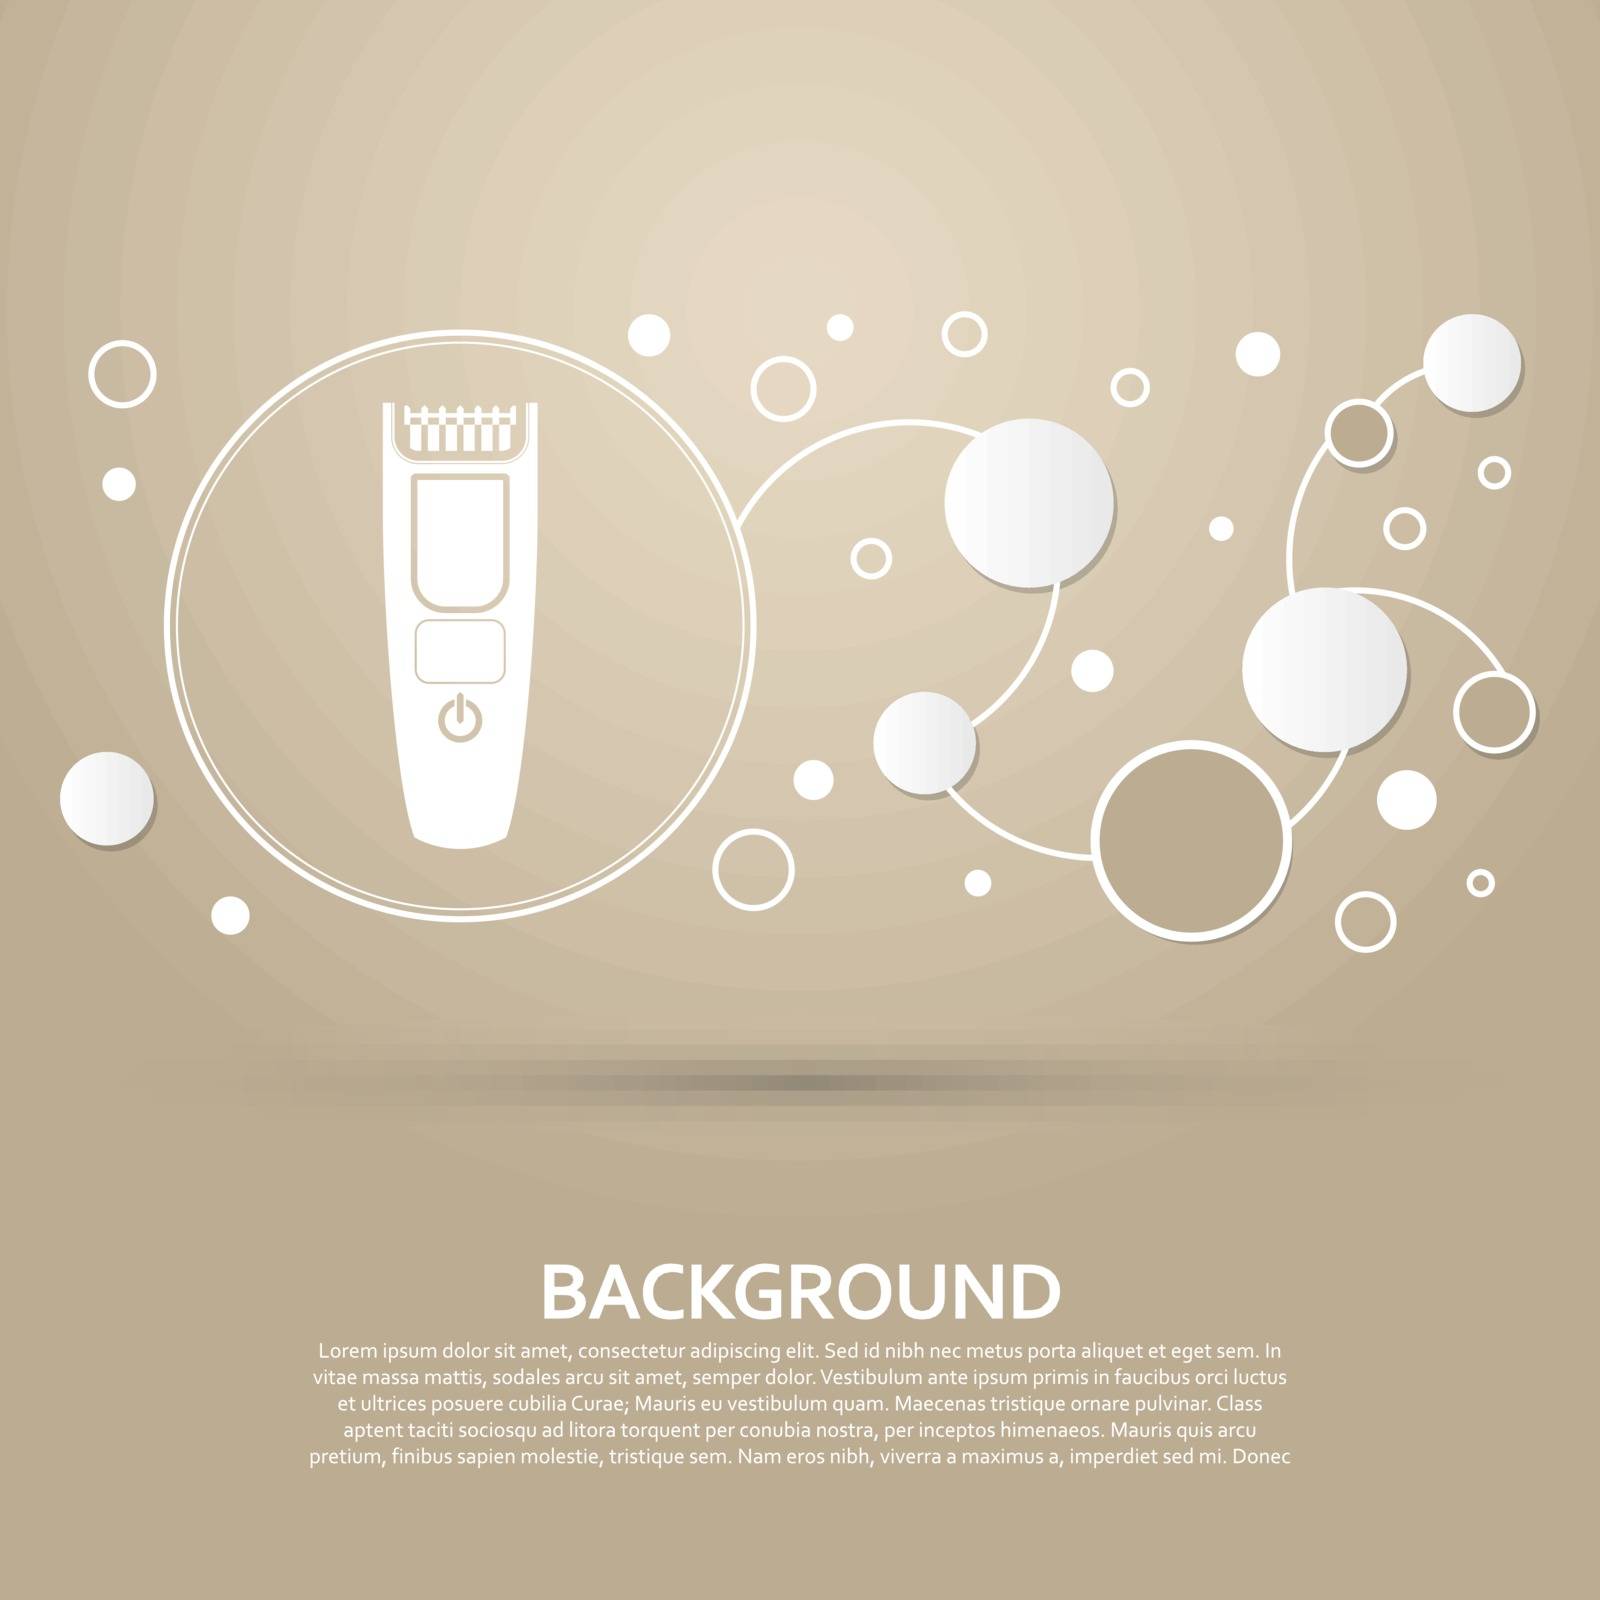 Shaver hairclipper icon on a brown background with elegant style and modern design infographic. Vector illustration